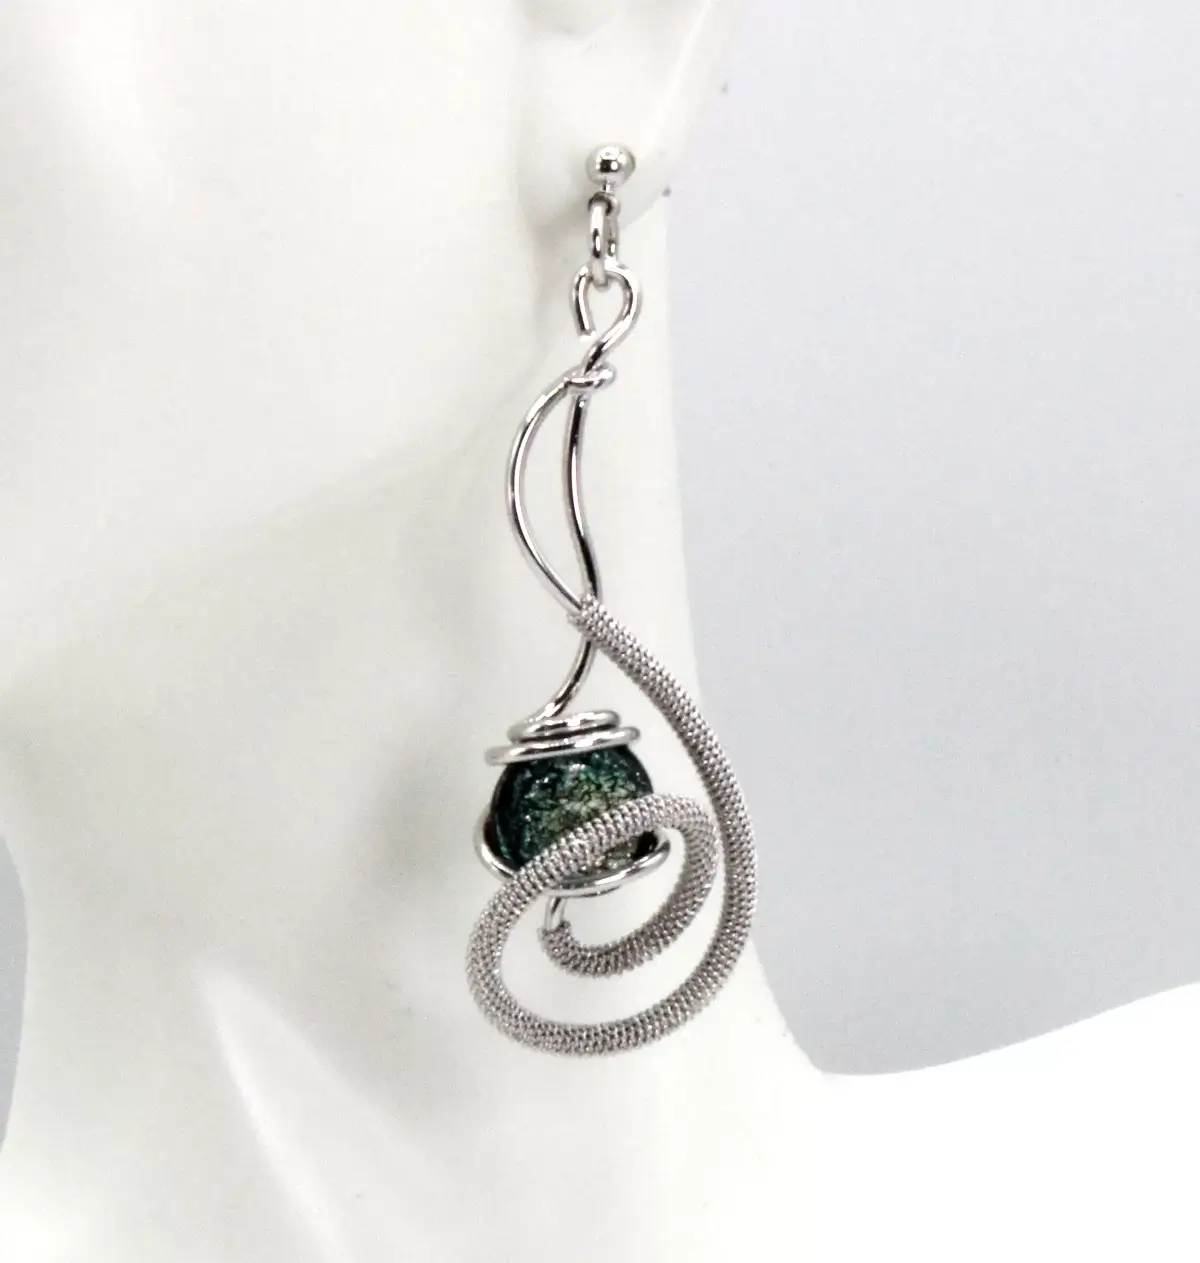 Swirl long earring detailed wire wrapped rhodium with a sparkling green Murano glass bead